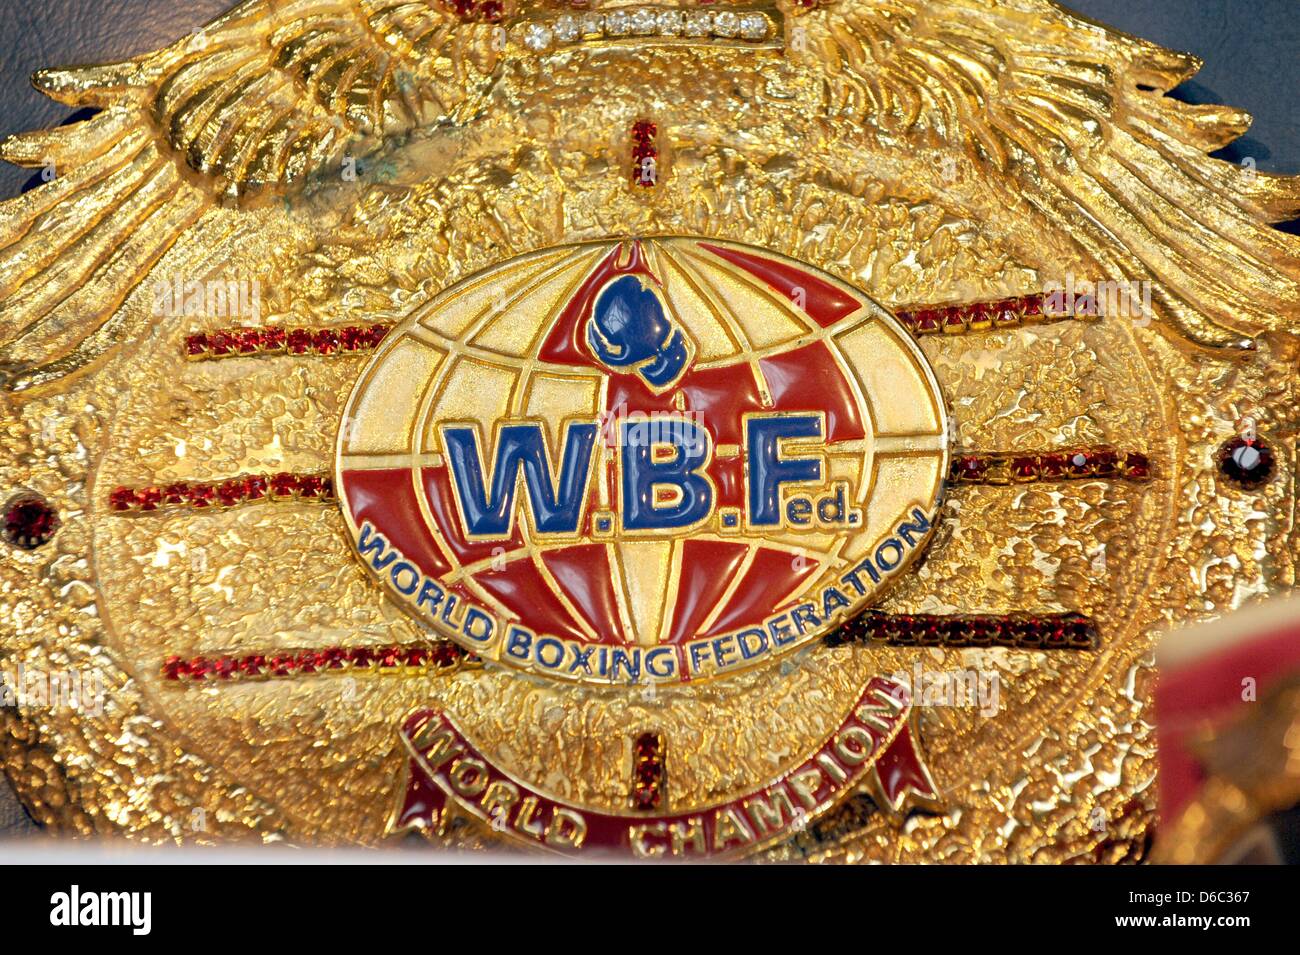 WBF World Championship belt is pictured during press conference in Offenburg, Germany, 11 January 2012. The fight for the world champion title will take place between Kuehne and Domsodi in